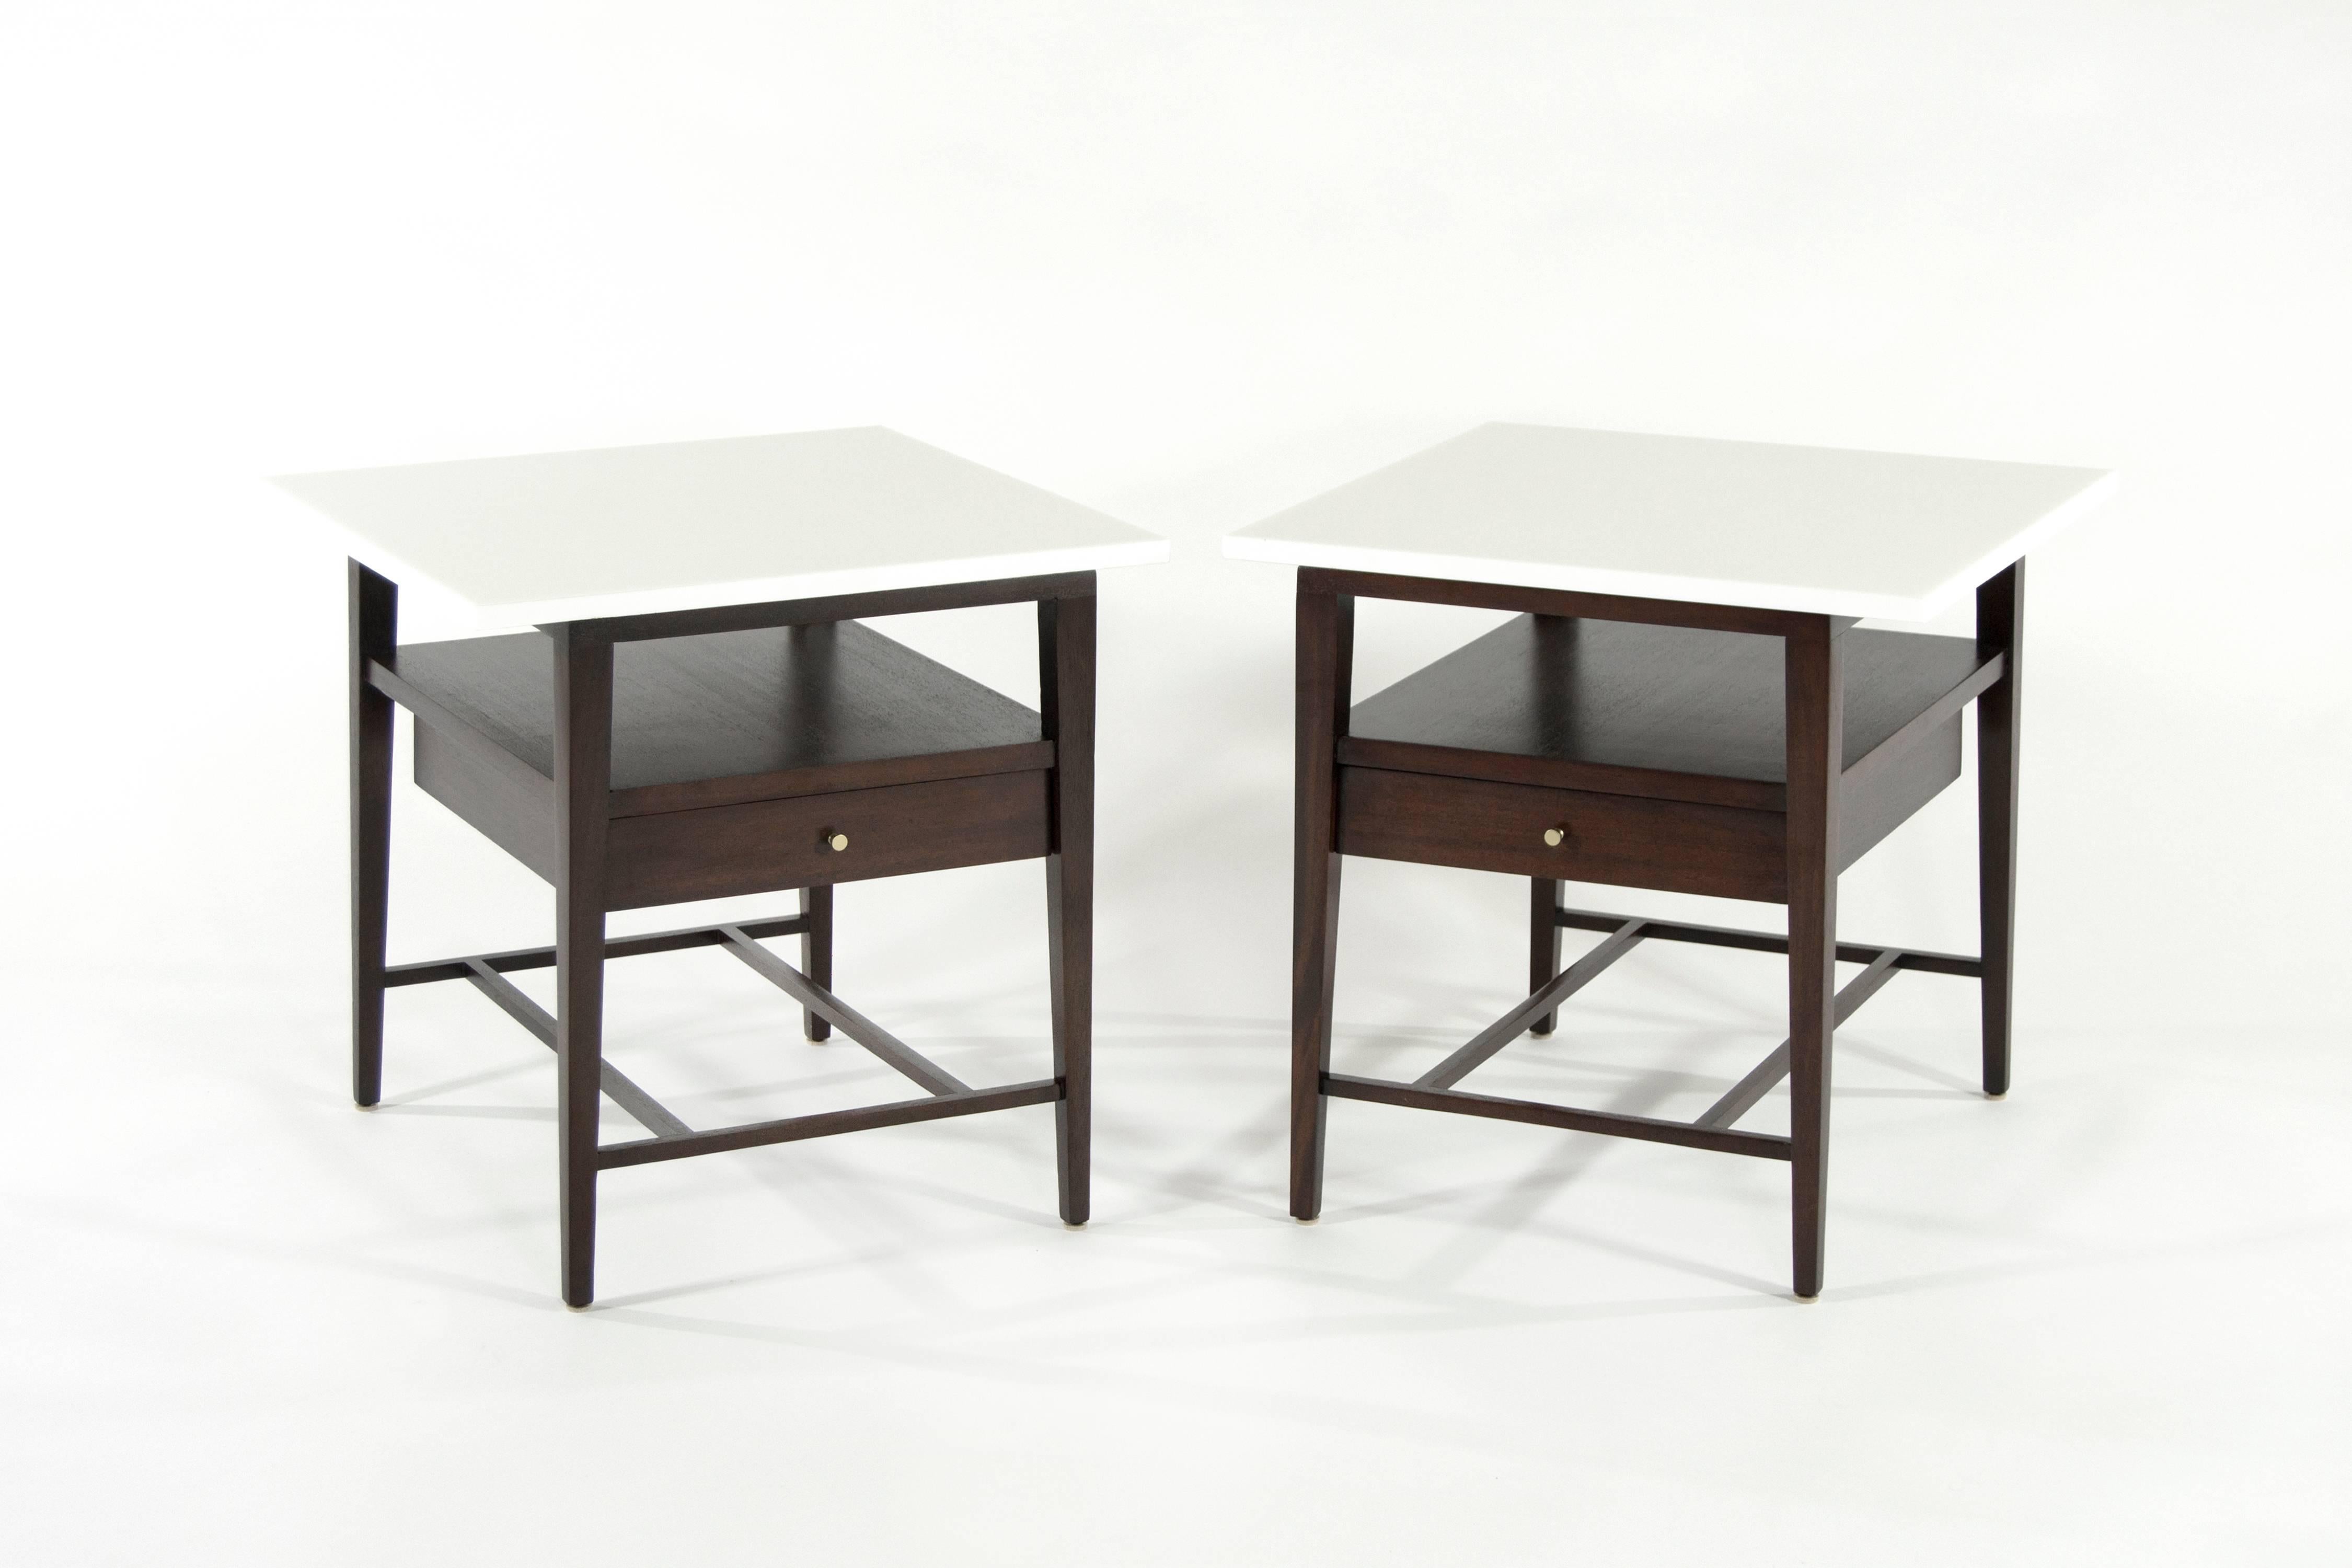 Rare pair of mahogany end or side tables, Calvin group, circa 1950s. Fully restored.